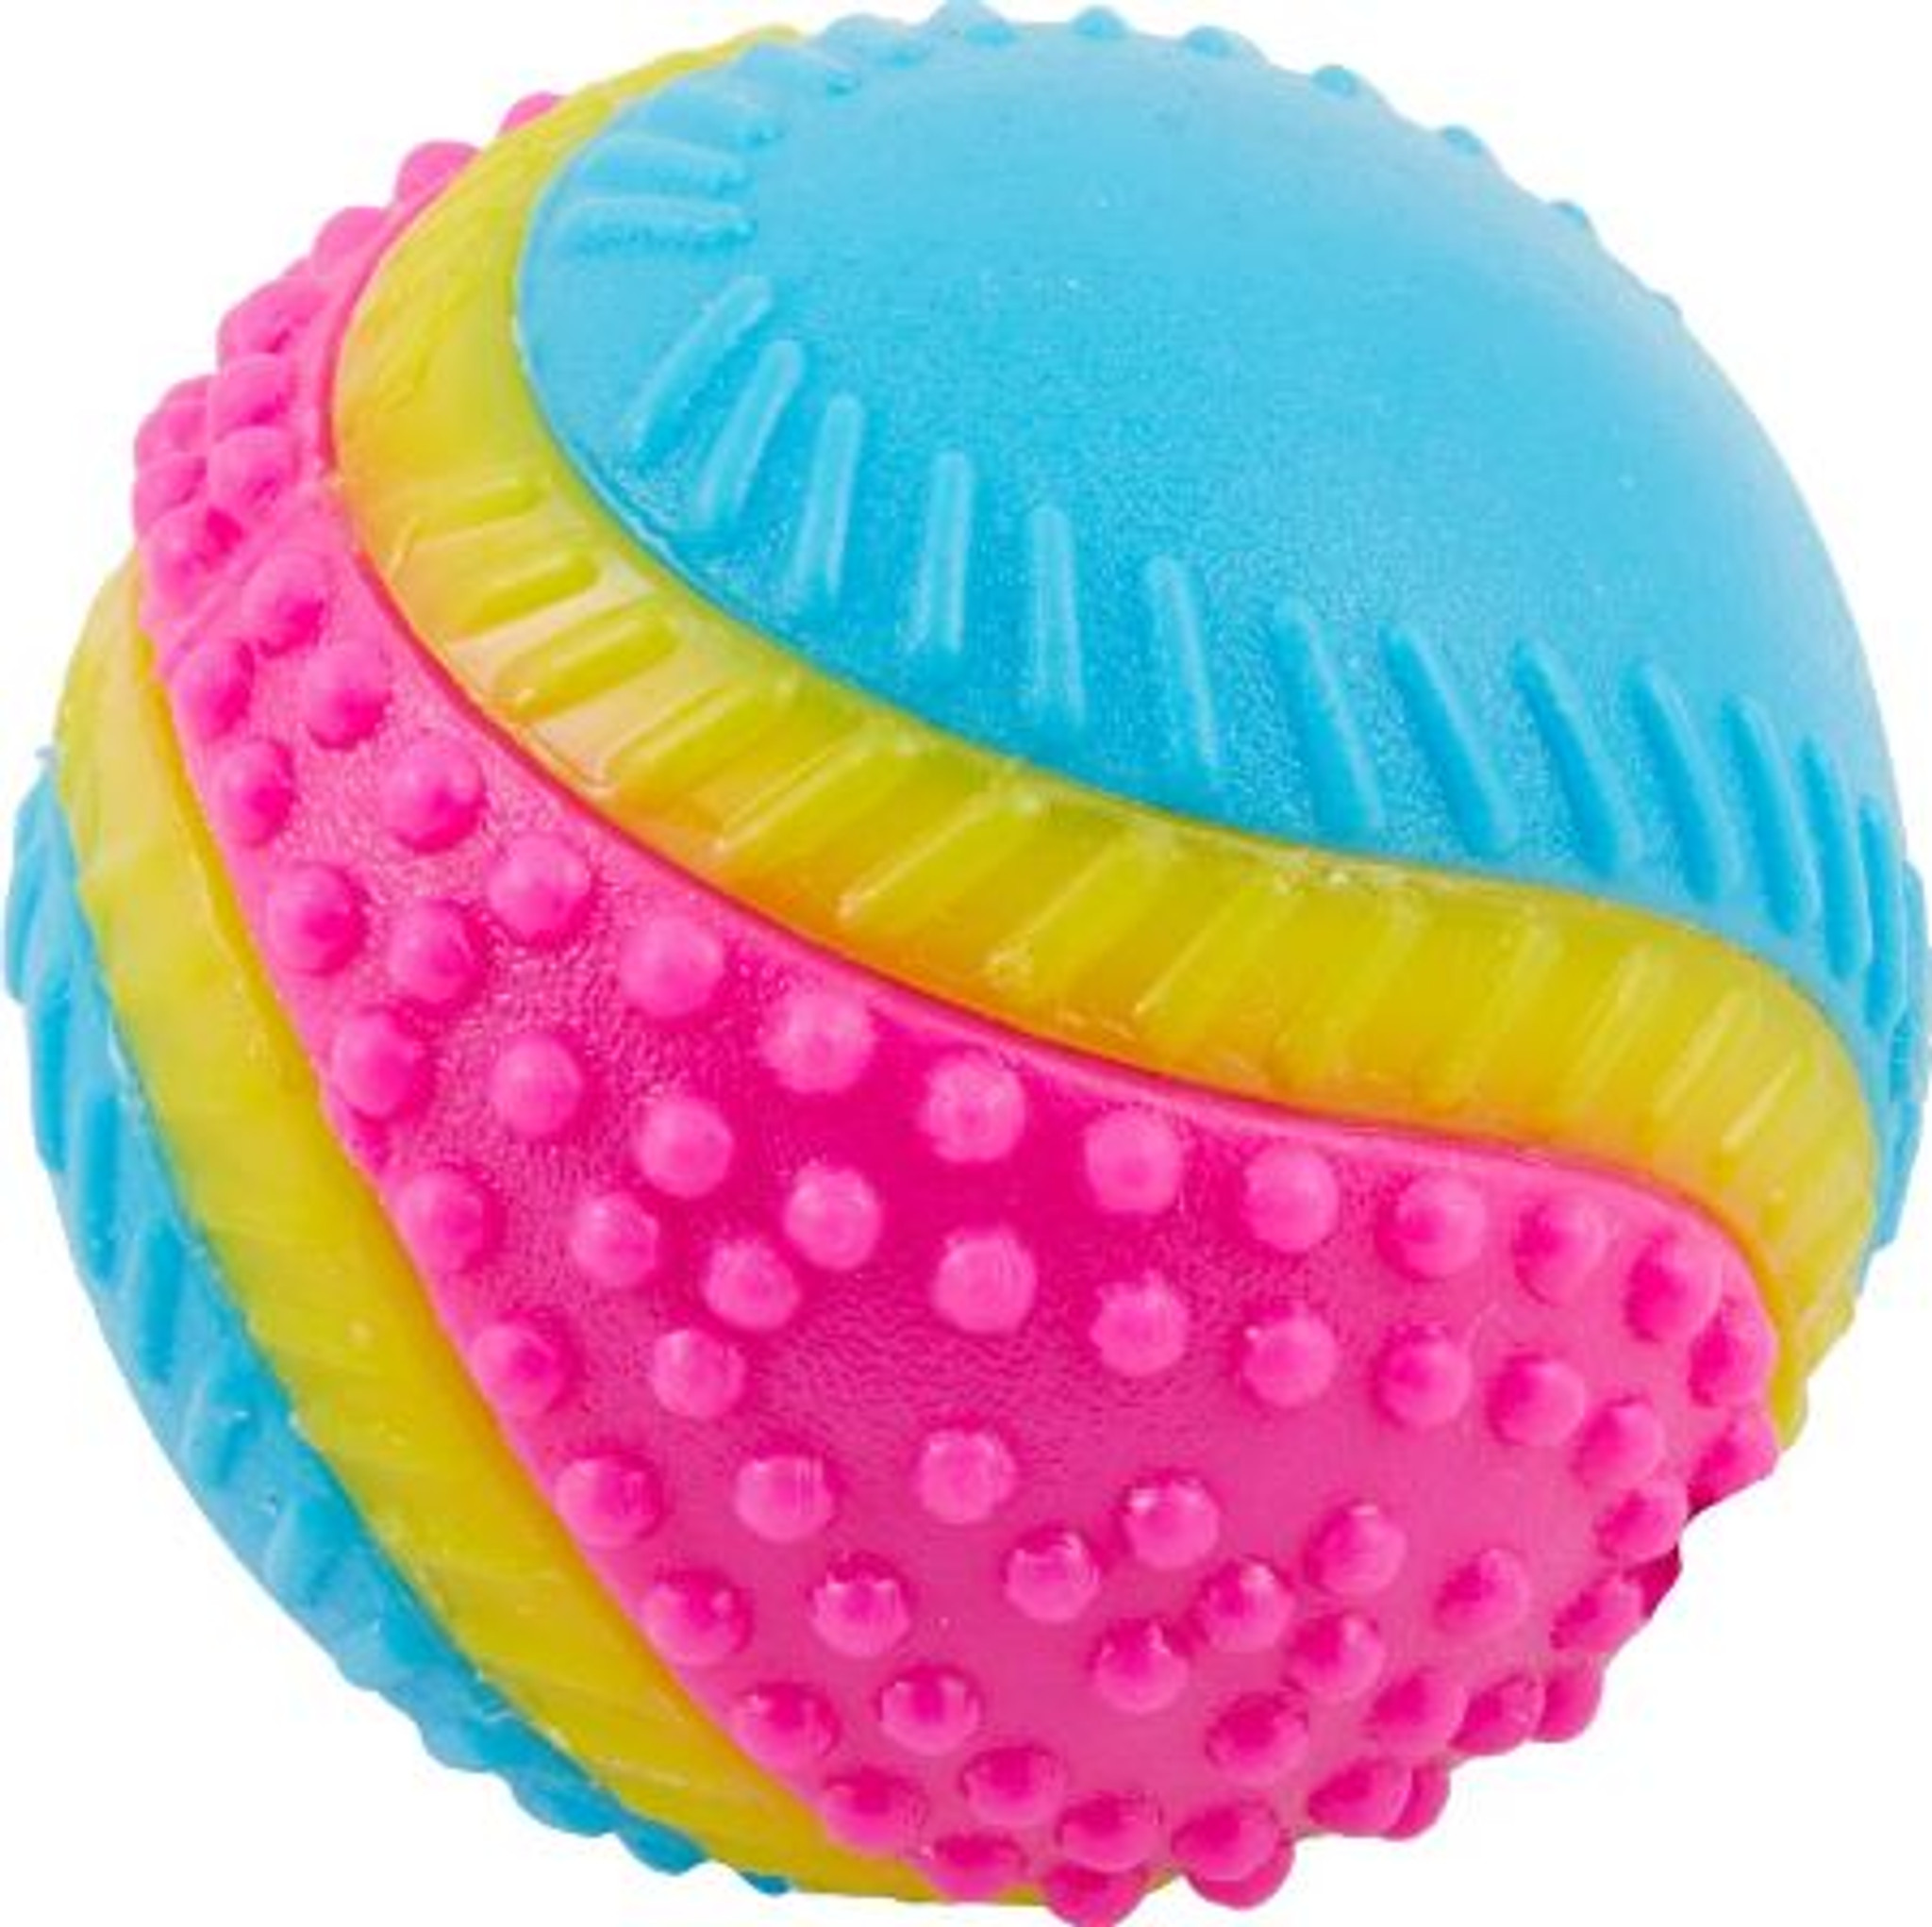 Ethical Pet Spot Sensory Ball 2.5 inch Colorful Rubber Squeaker Toy for Dogs